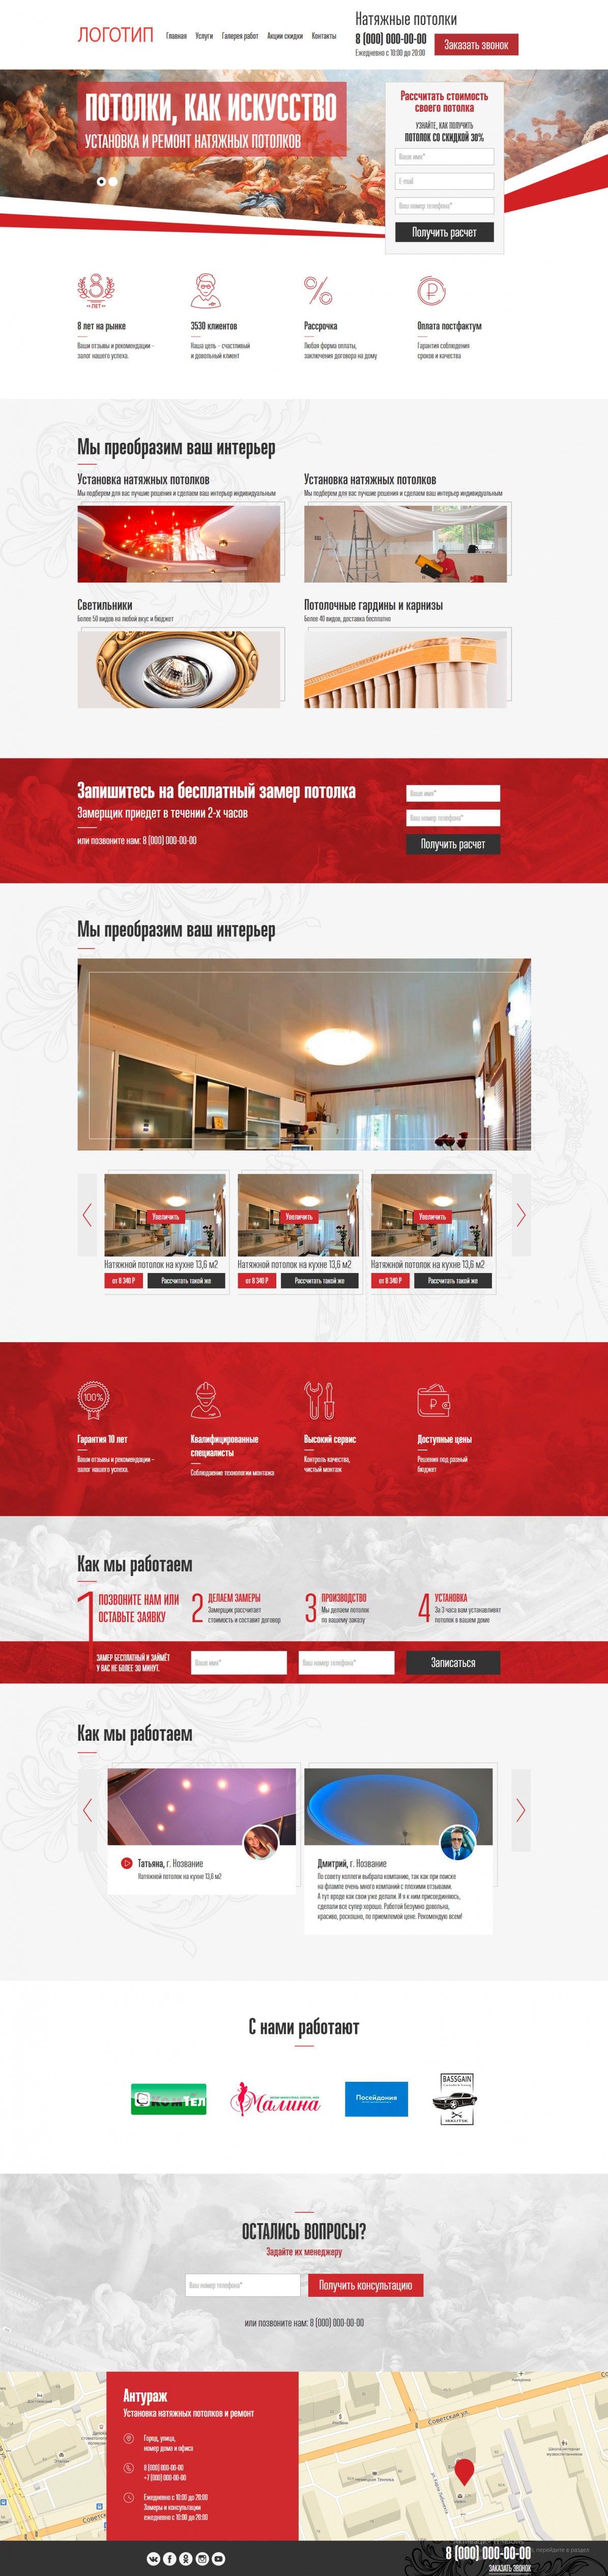 Landing page - Stretch ceilings. Repair, installation